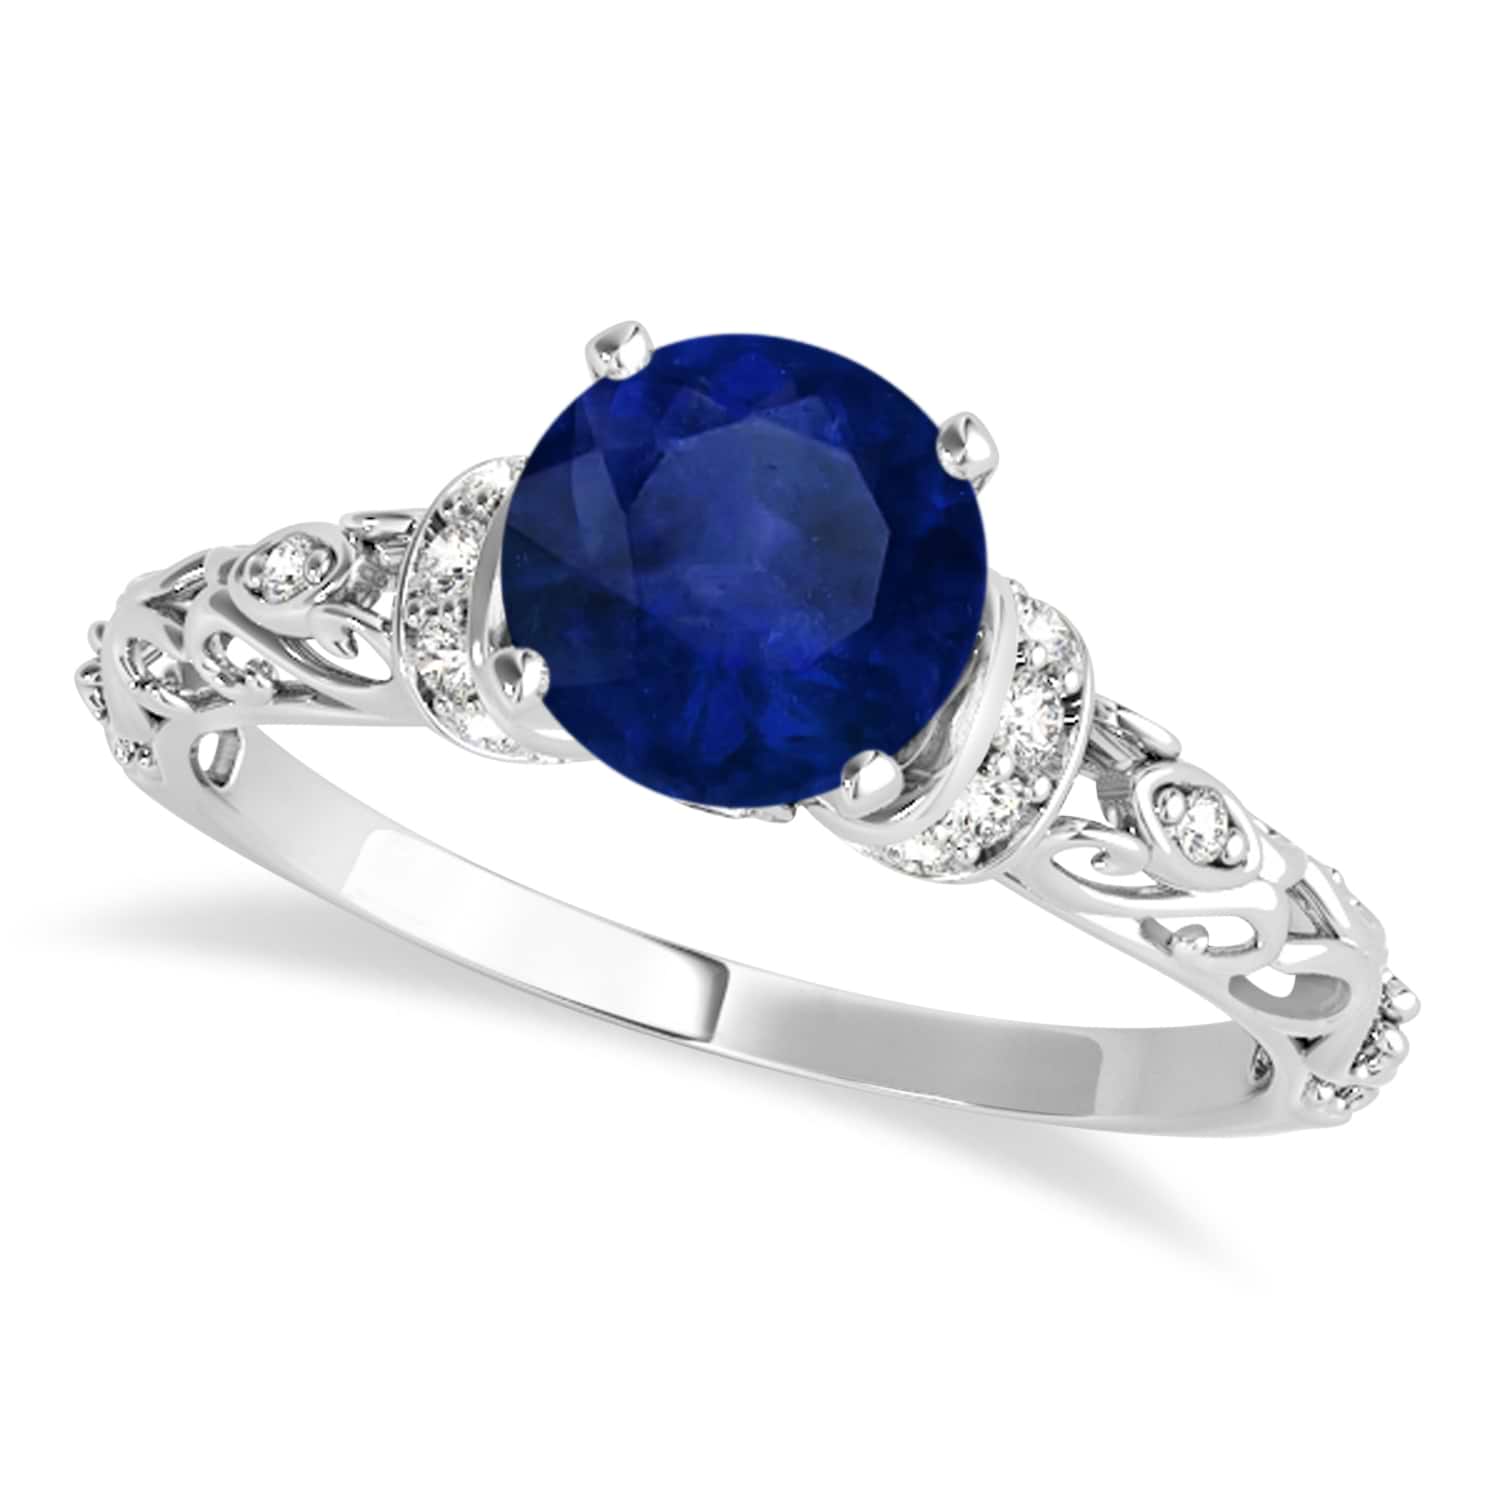 Blue Sapphire & Diamond Antique Style Engagement Ring 18k White Gold (1.12ct)